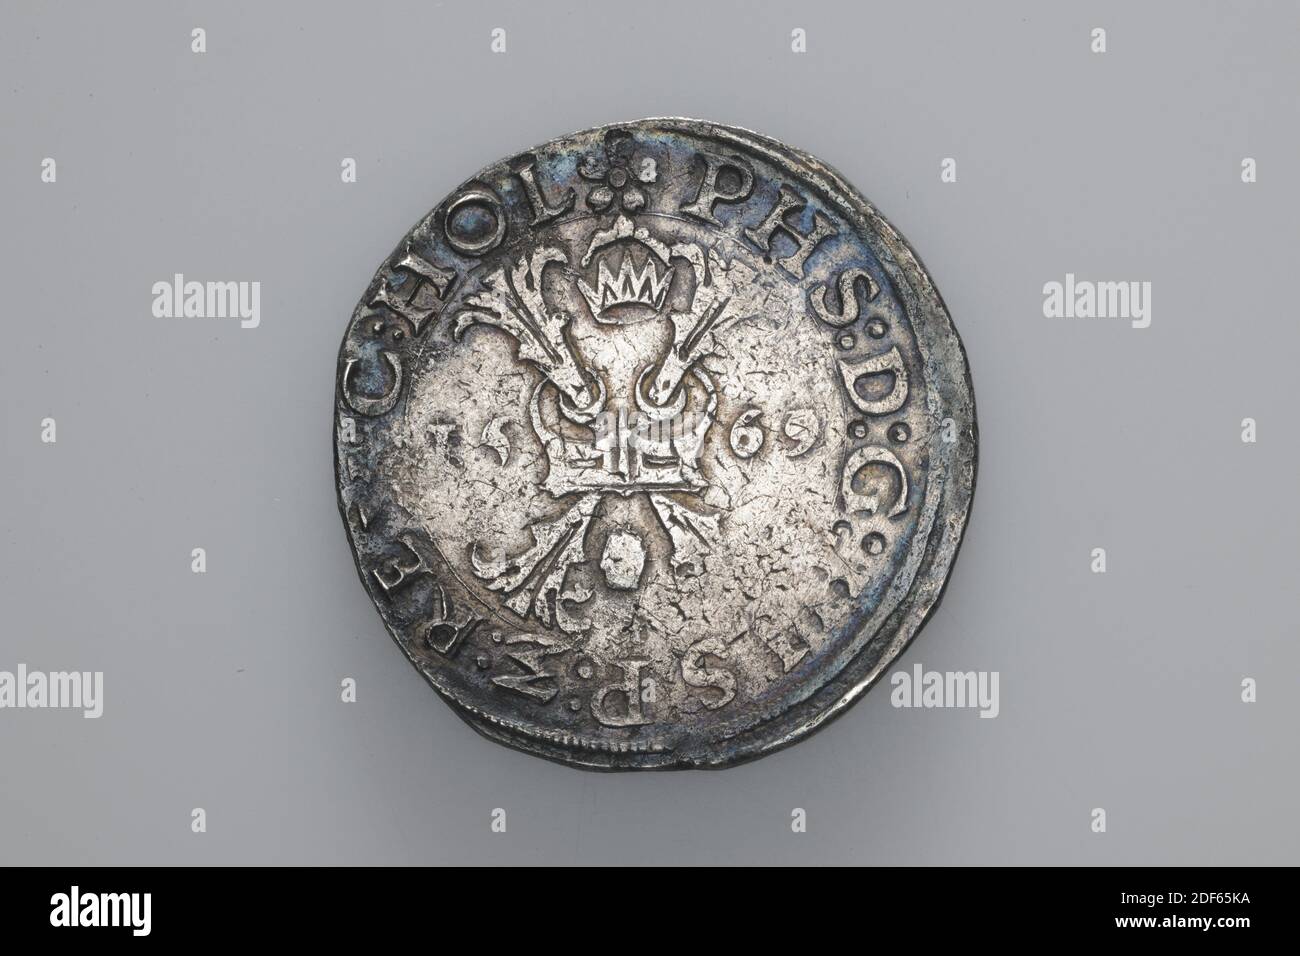 coin swap, Anonymous, 1569, minted, General: 3.8 x 0.2cm 38 x 2mm, Weight: 28.1g, weapon sign, cross, Silver coin of King Philips II, minted in 1569. On the obverse is a central Burgundian cross depicted. The year 1569 is written on both sides. Around it is the circular PHS D G HISP REX [worn] C HOL. On the reverse is a crowned coat of arms with the chain of the Golden Fleece around it, with the sheepskin hanging at the bottom. It is surrounded by the circular DOMINUS MI HI ACIVIOR, 1926 Stock Photo